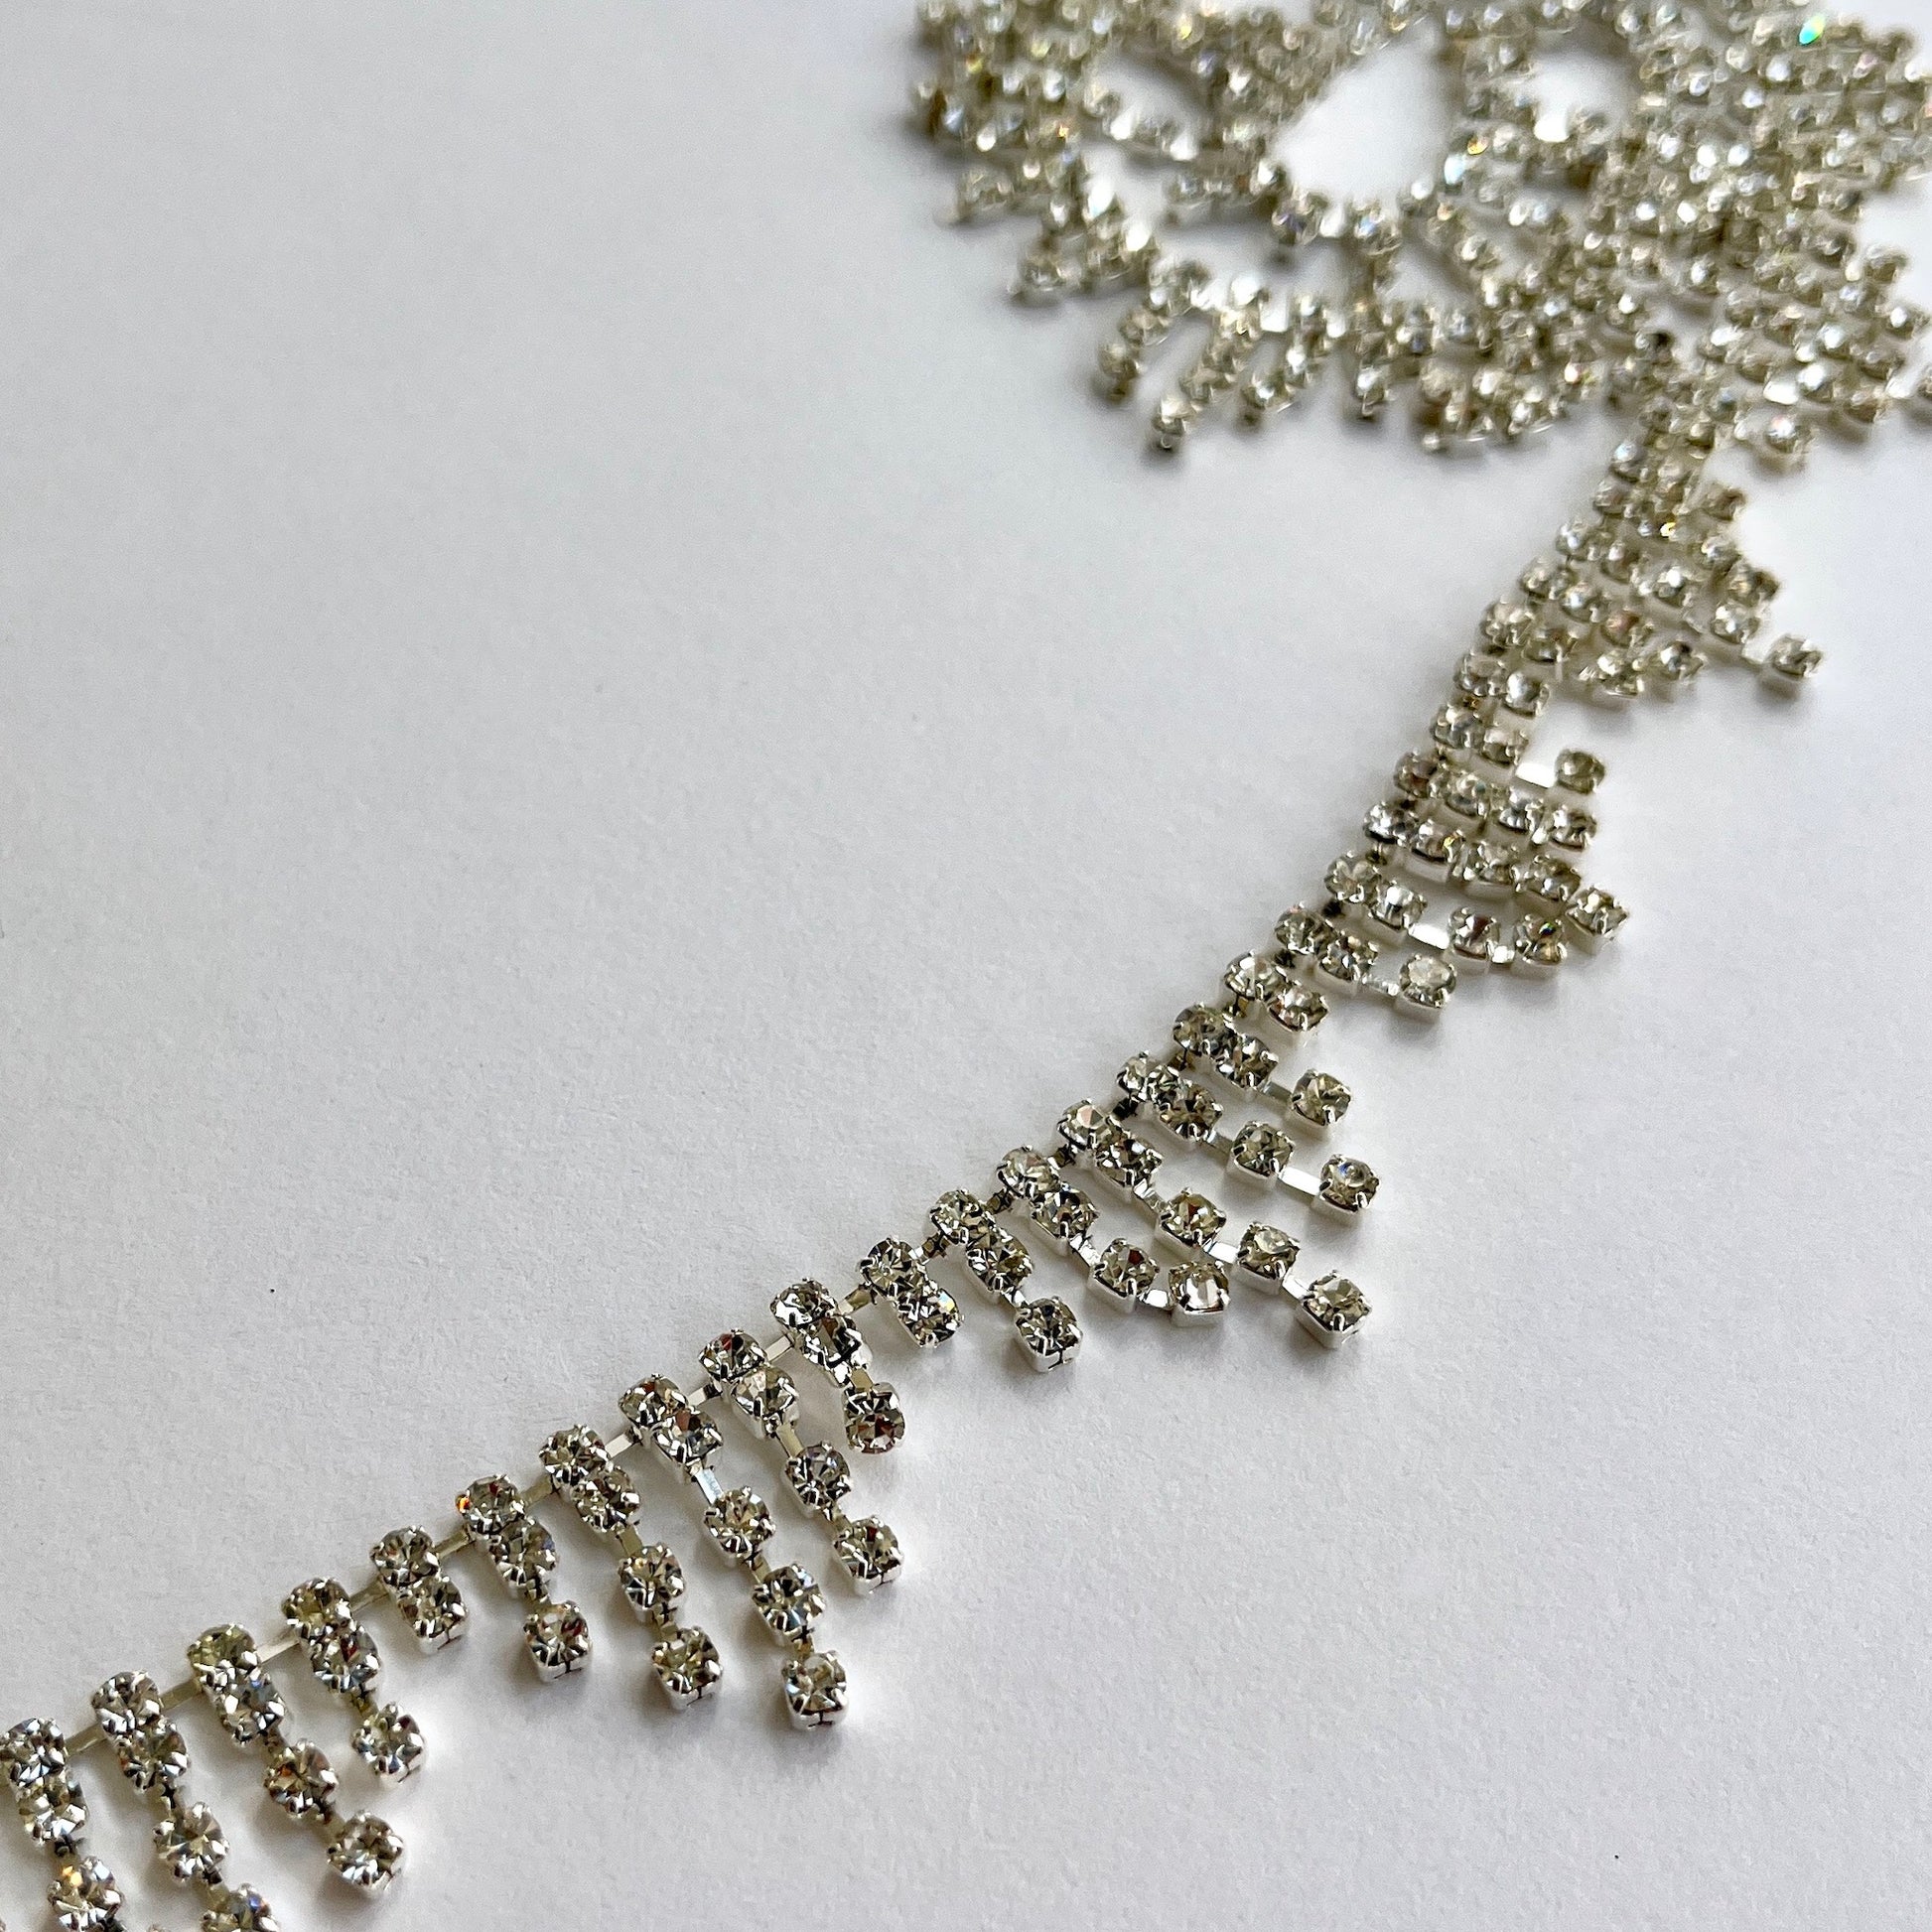 90cm length of a very sparkly rhinestone fringe trim made from premium high grade diamanté crystals set in a flexible metal chain casing. Popular for bridal wear, evening wear, crafts, jewellery and headband making.